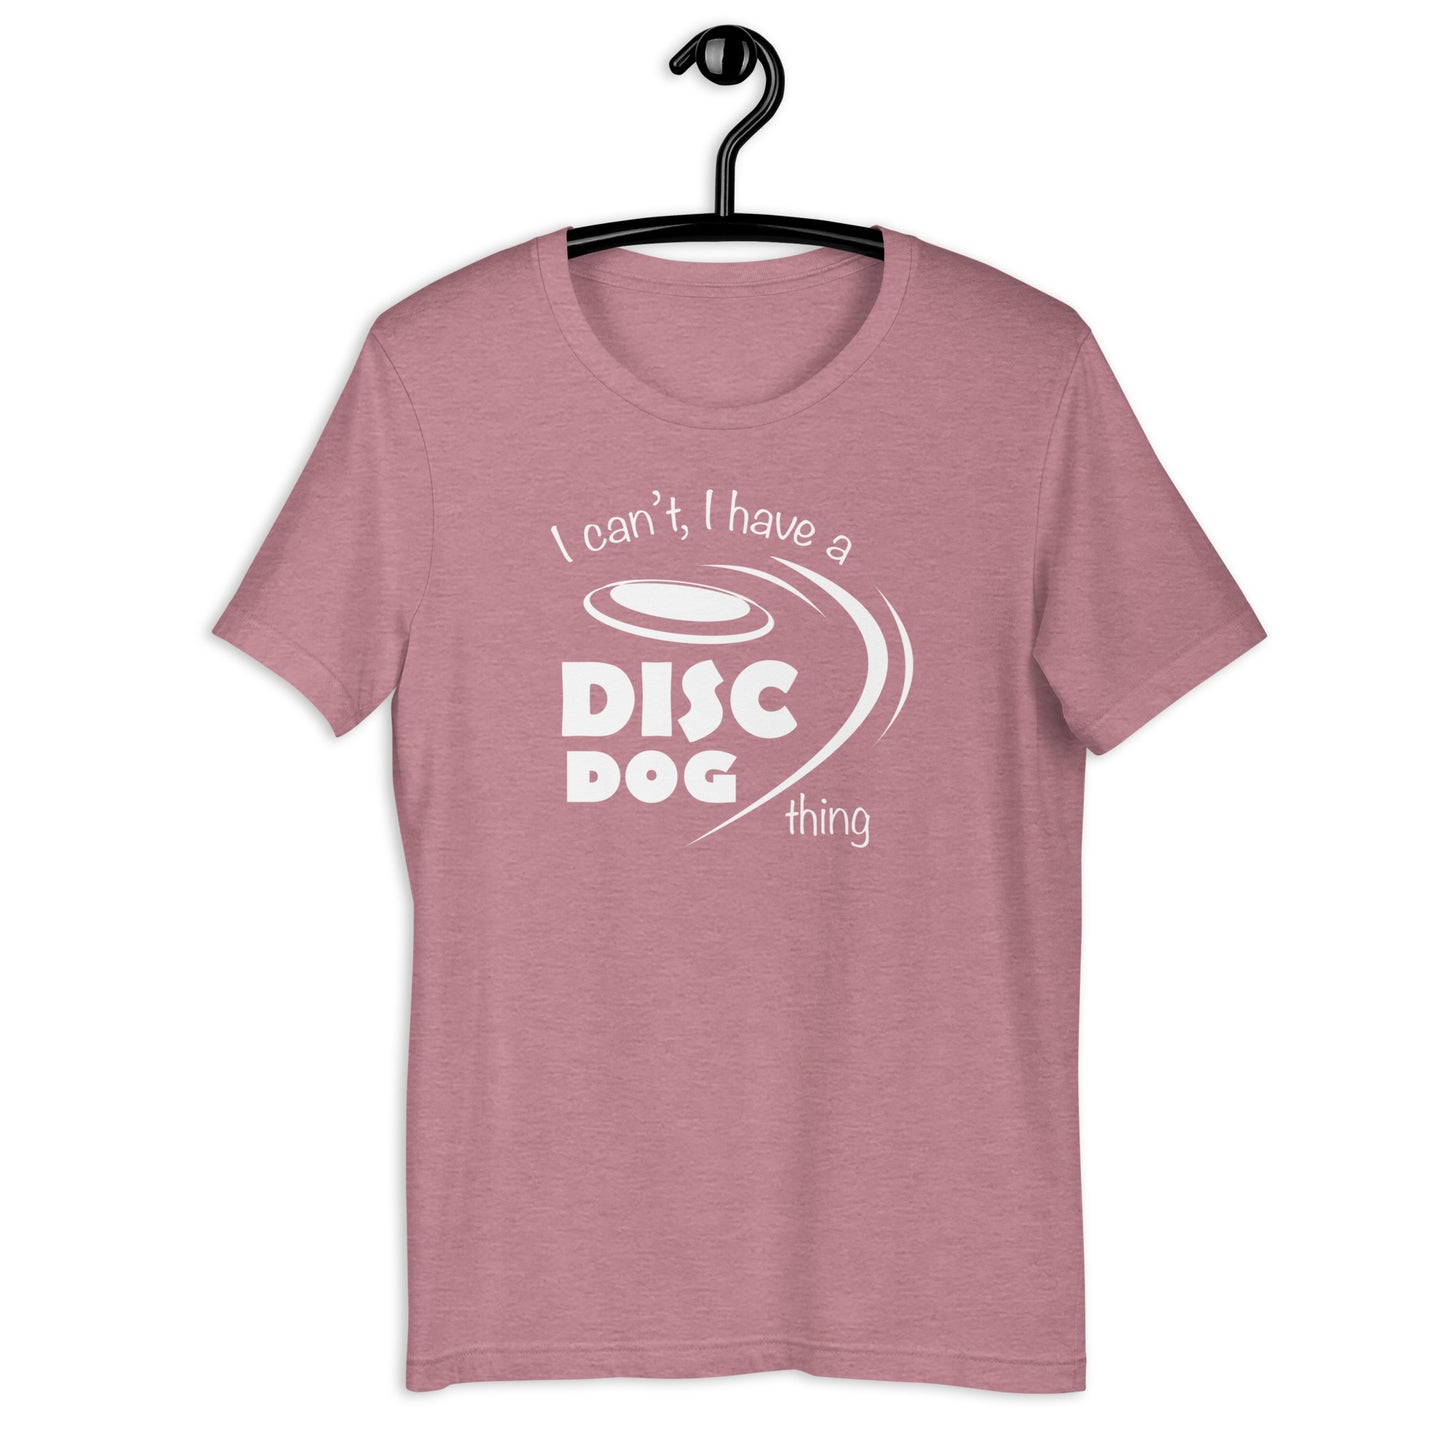 CANT, DISC THING - Unisex t-shirt